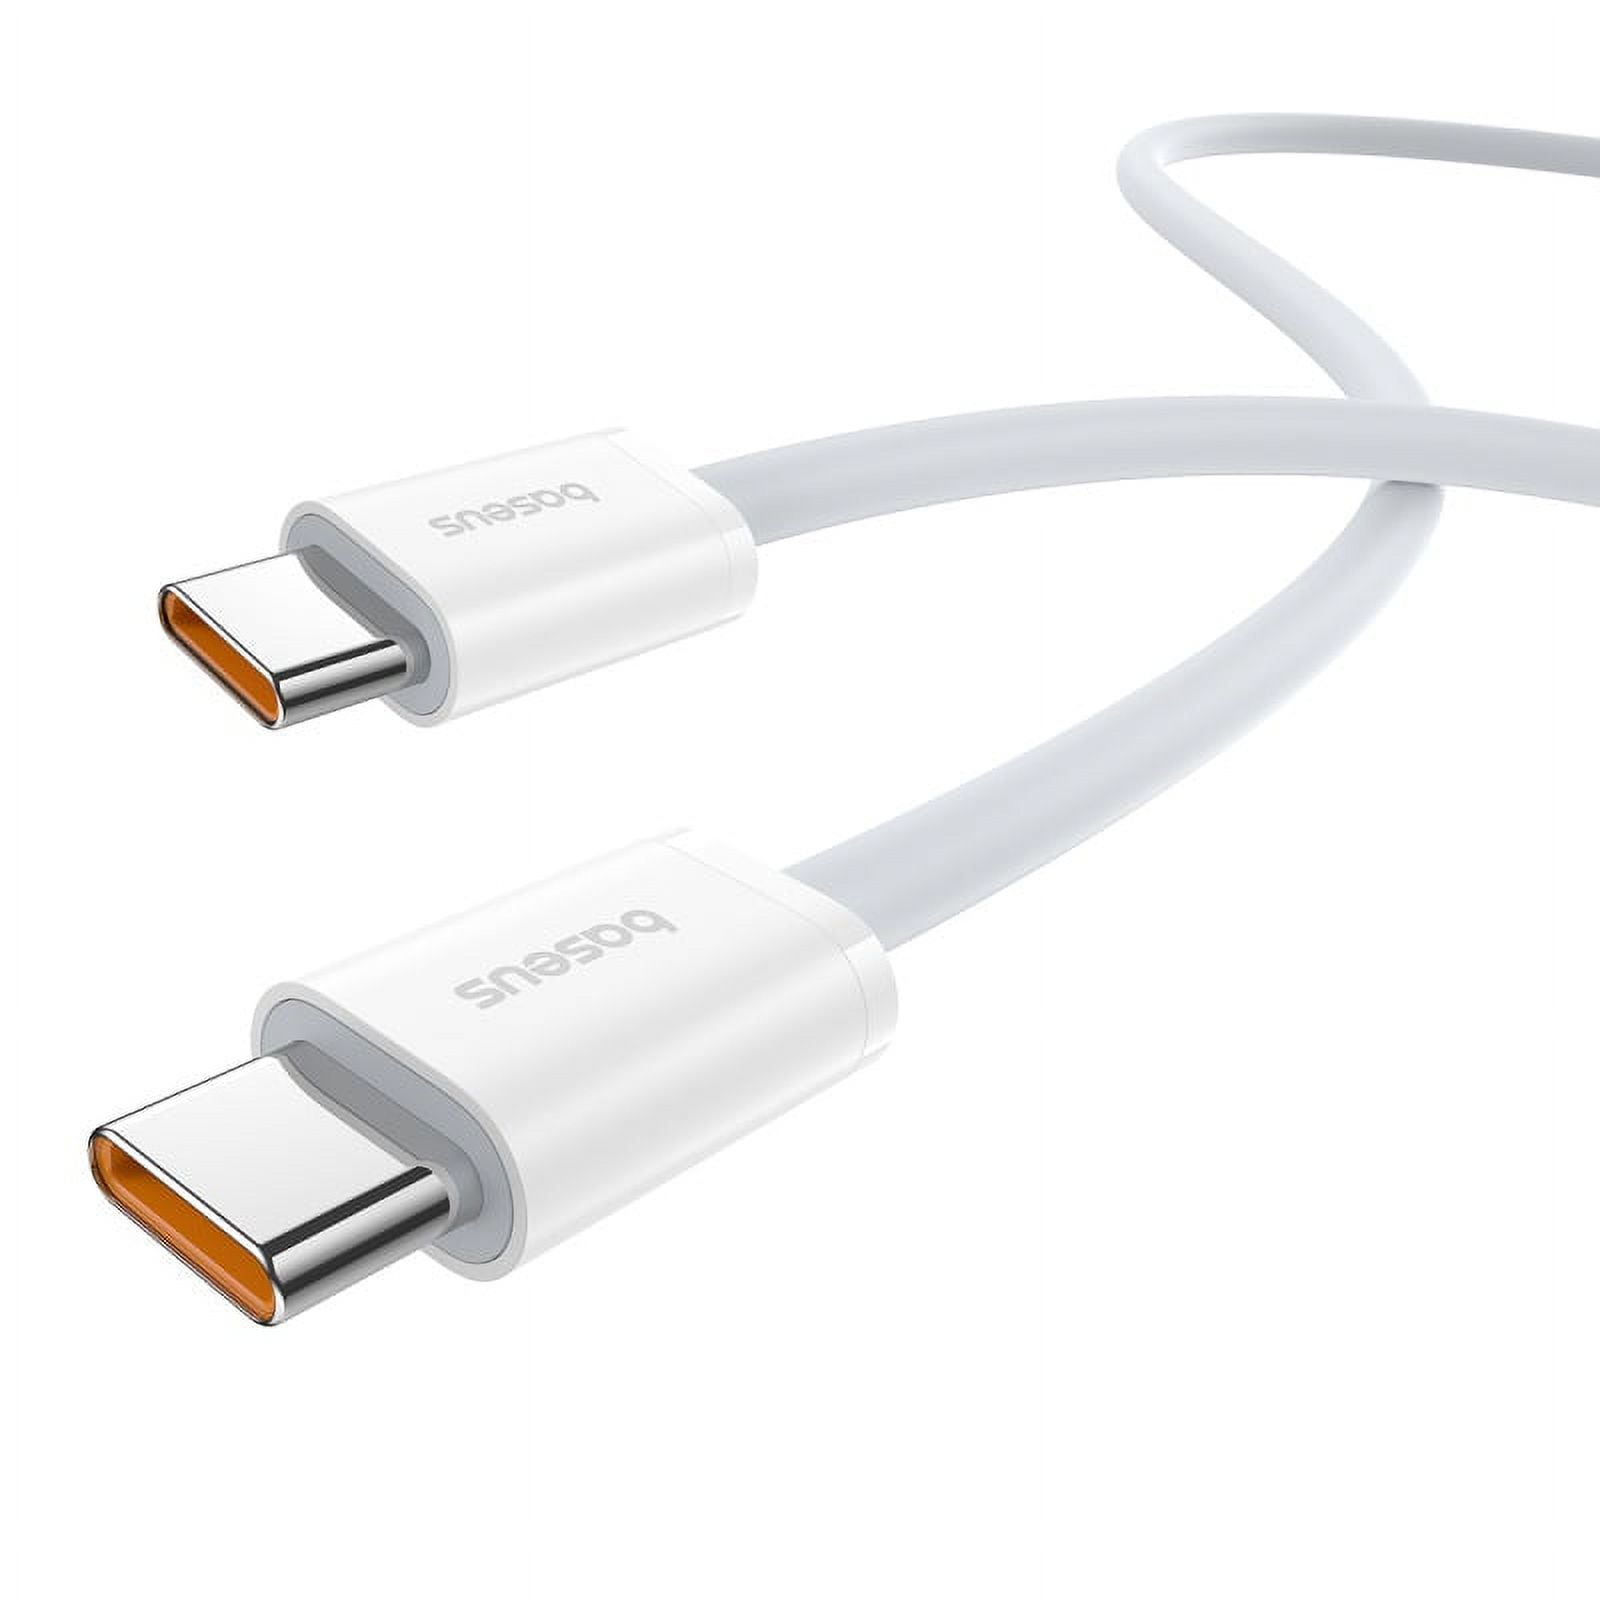 USB-C to MagSafe 3 Cable (2 m) - Midnight